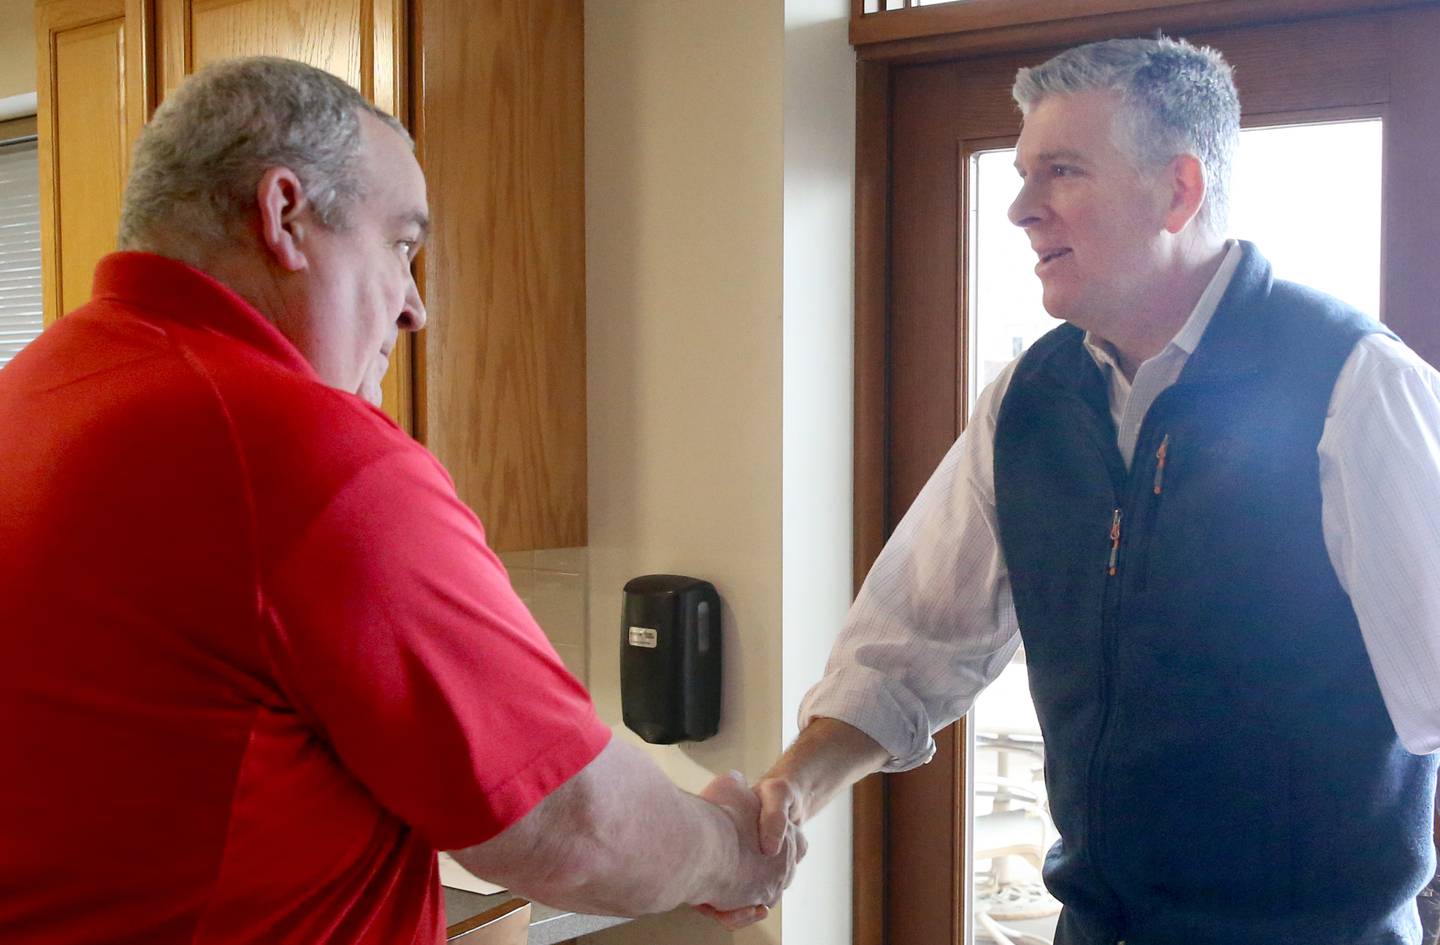 U.S. Rep. Darin LaHood (R-Illinois) meets with Streator Fire Chief Gary Bird as he tours the fire department on Tuesday, Feb. 14, 2023 in Streator.